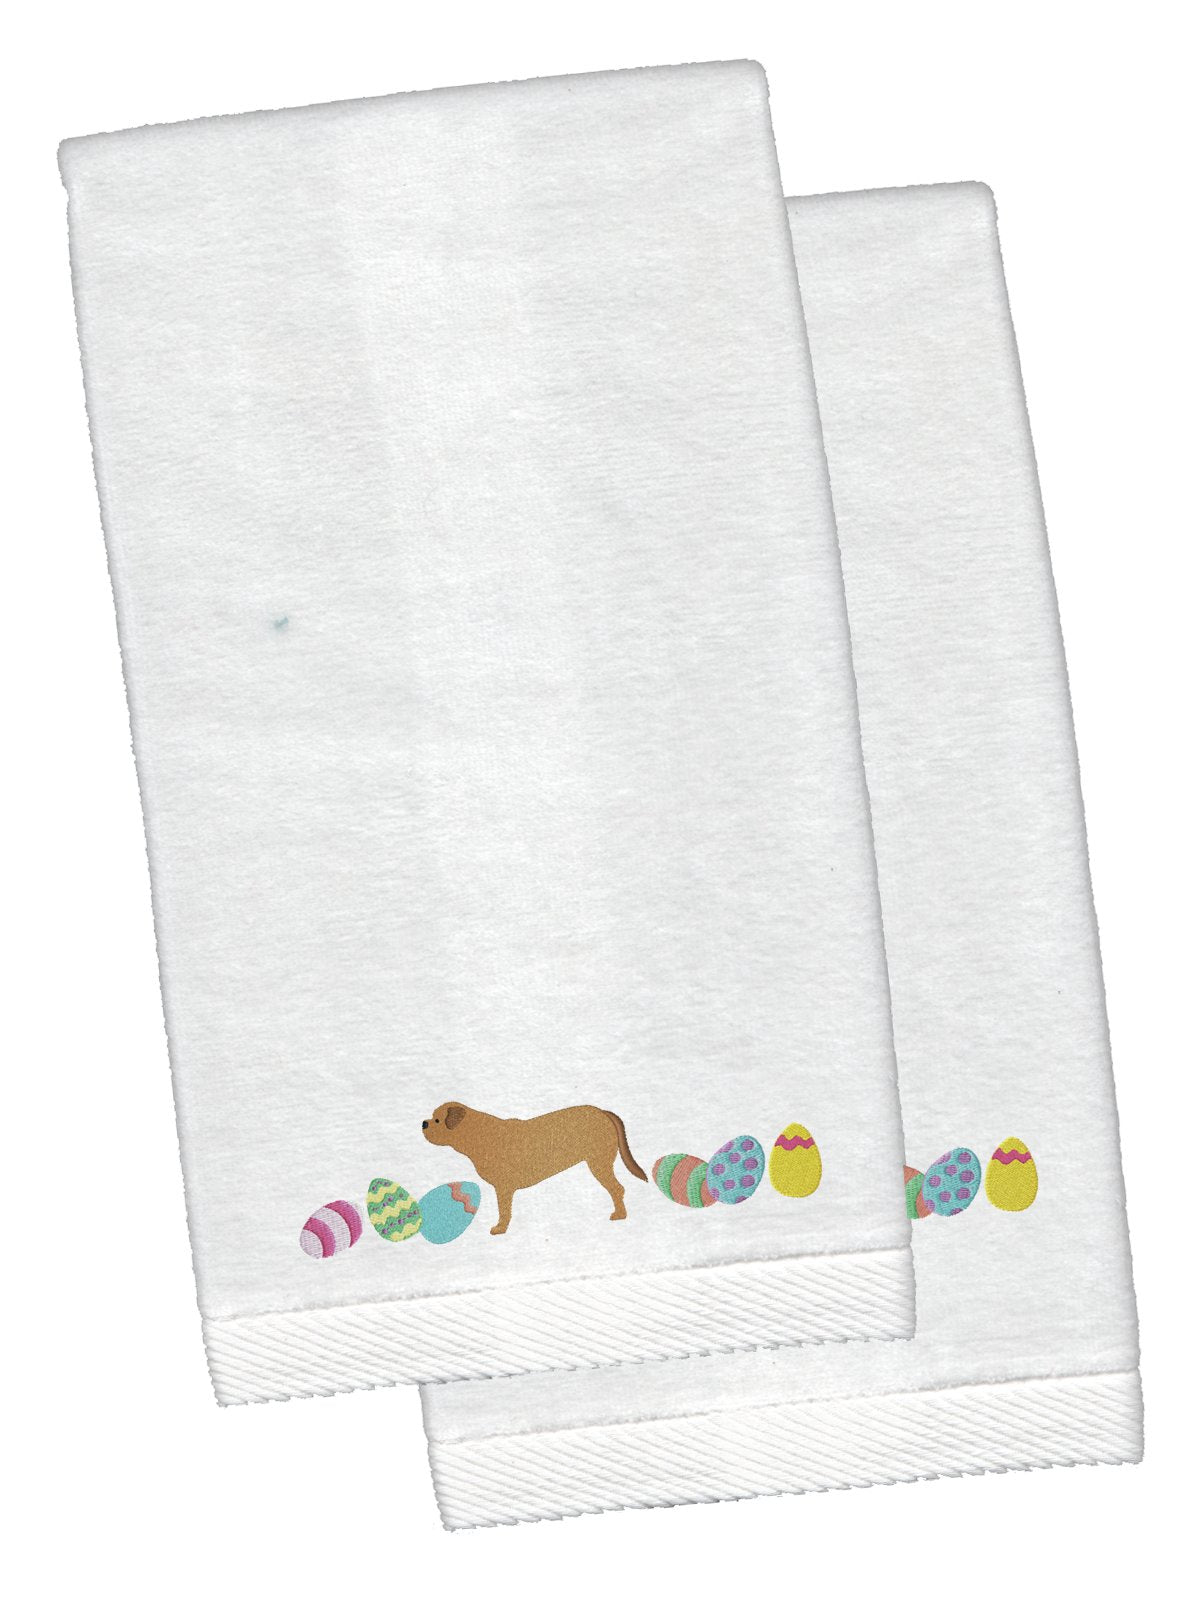 Dogue de Bordeaux Easter White Embroidered Plush Hand Towel Set of 2 CK1635KTEMB by Caroline's Treasures